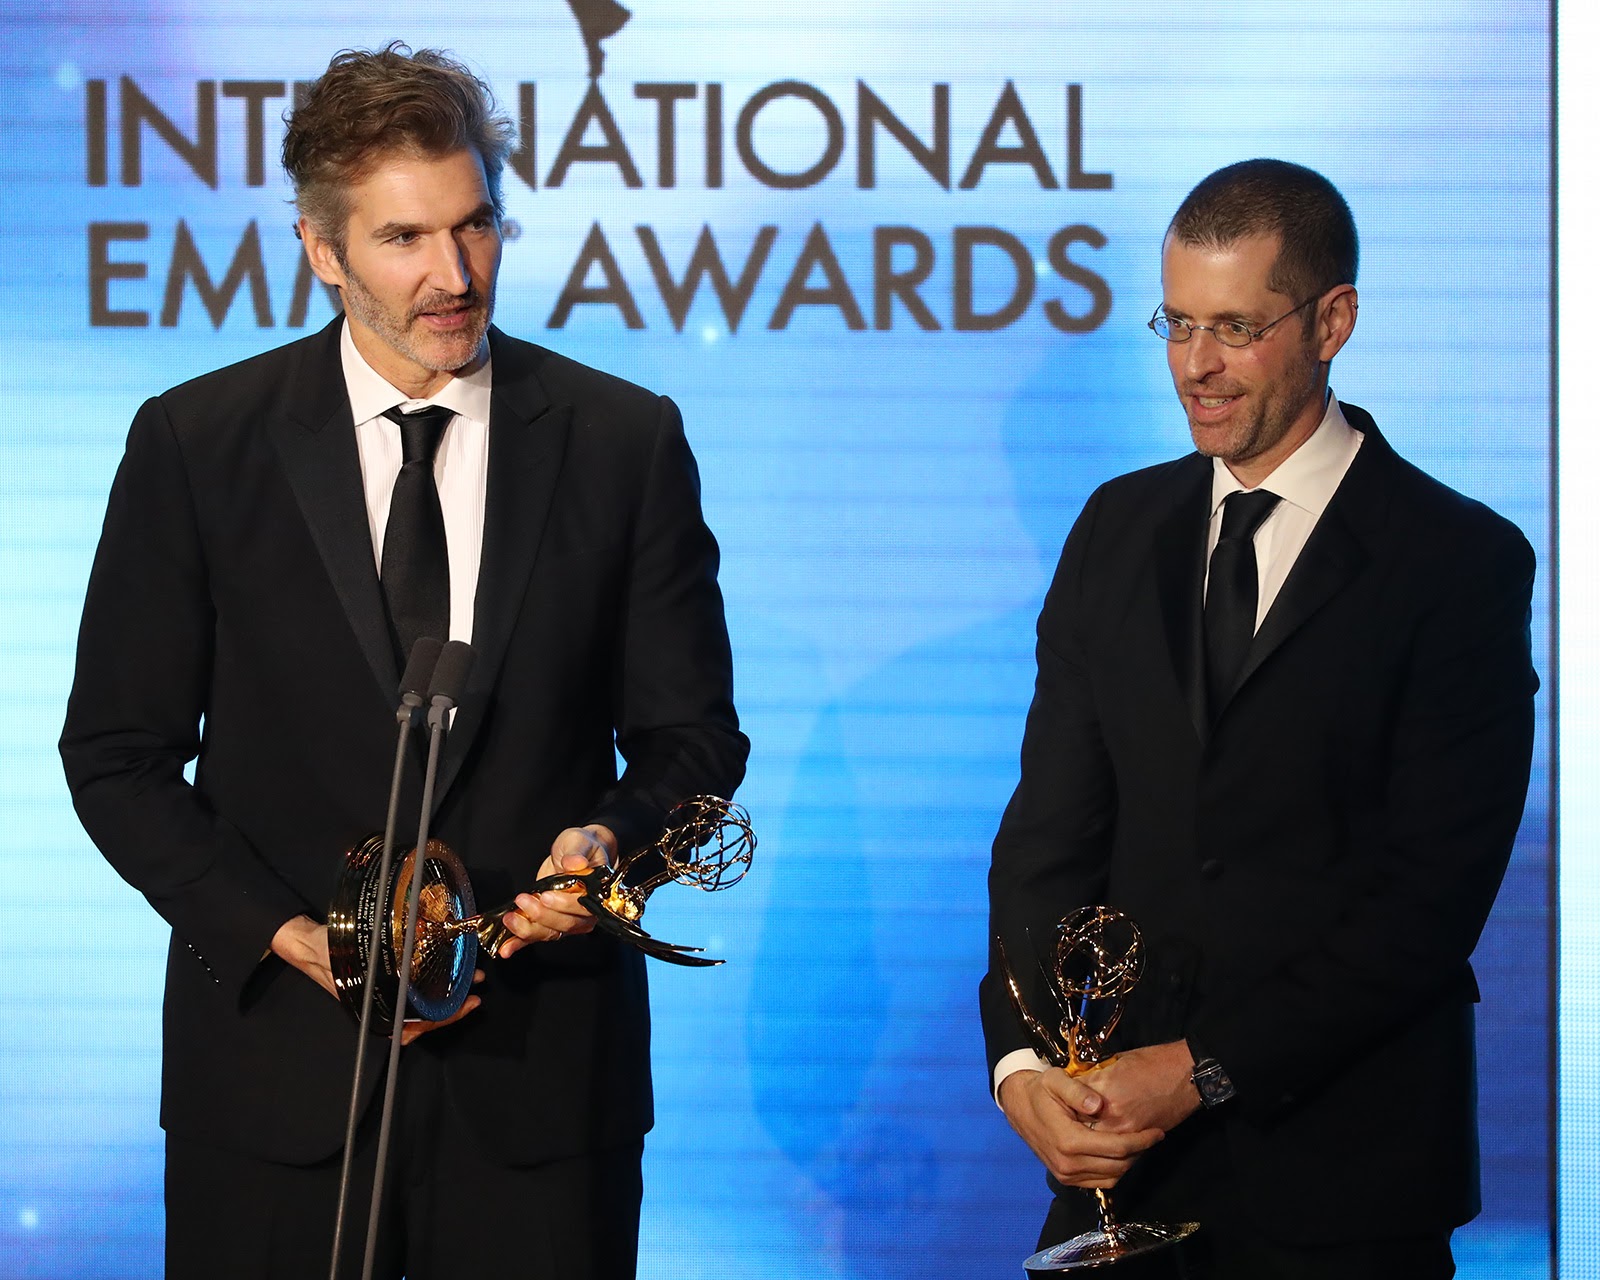 2019 Founders Award recipients David Benioff and D.B. Weiss